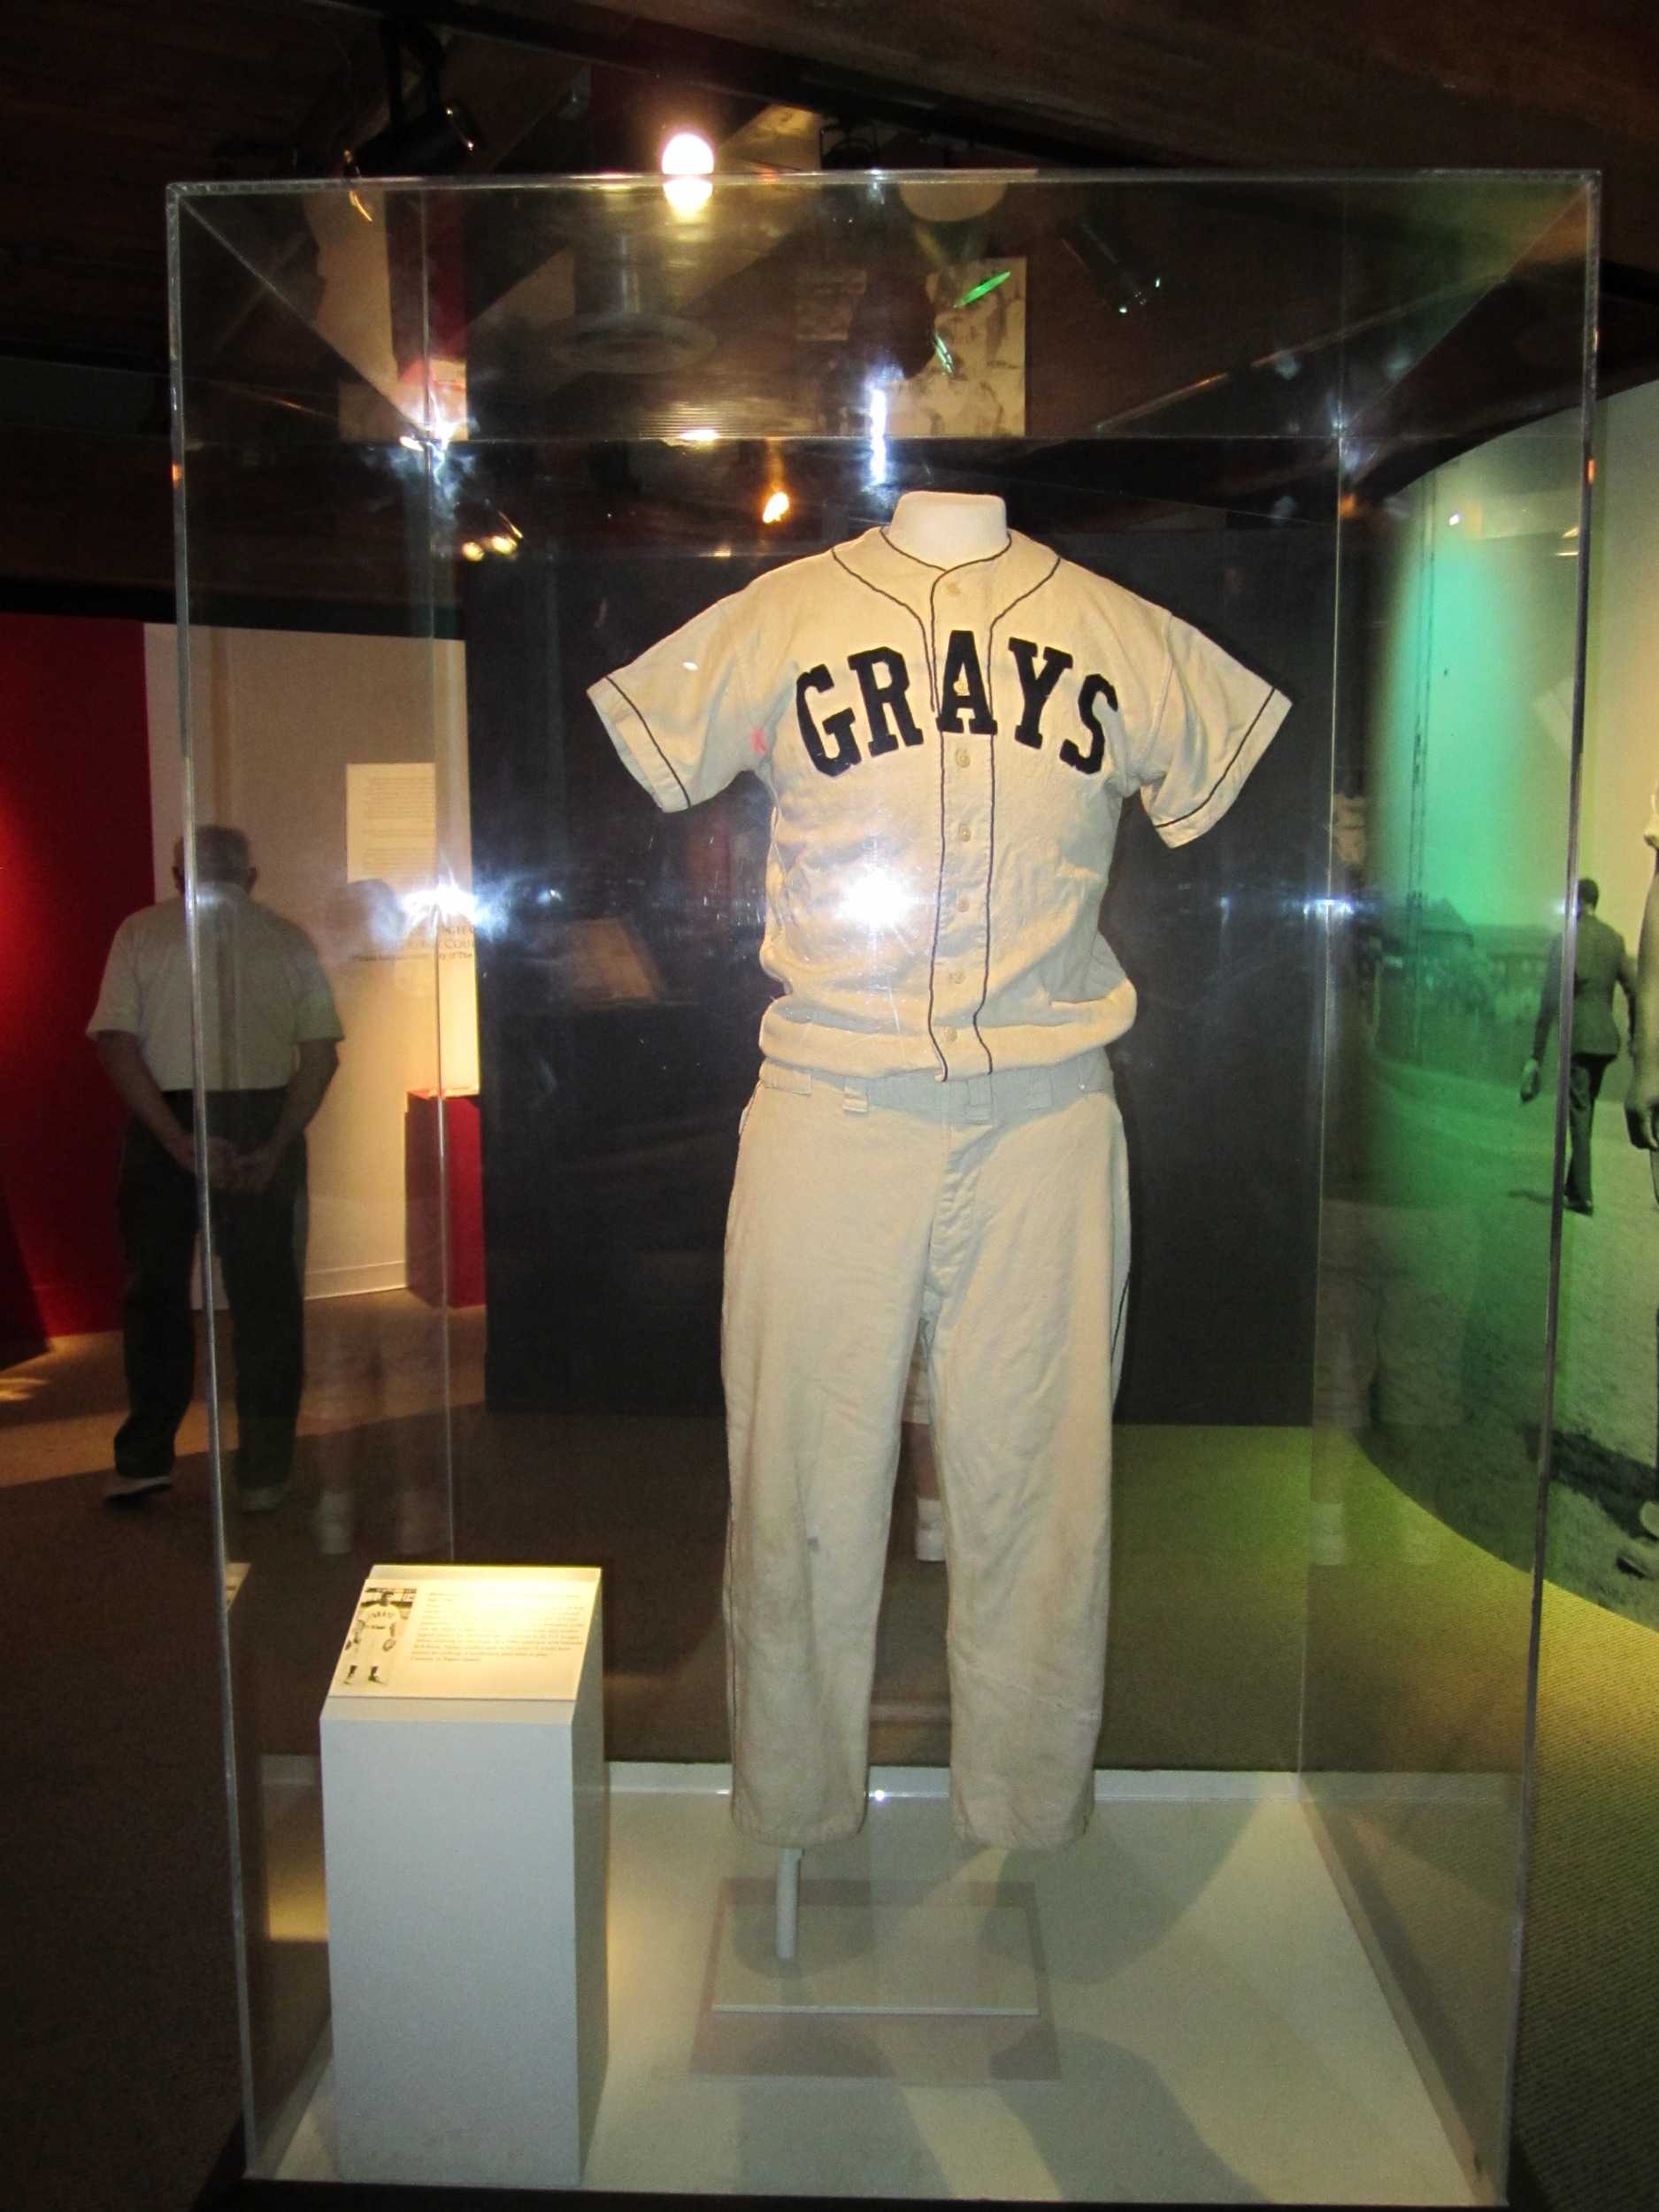 Pittsburgh's Crawfords and Grays featured in Negro League bobblehead series